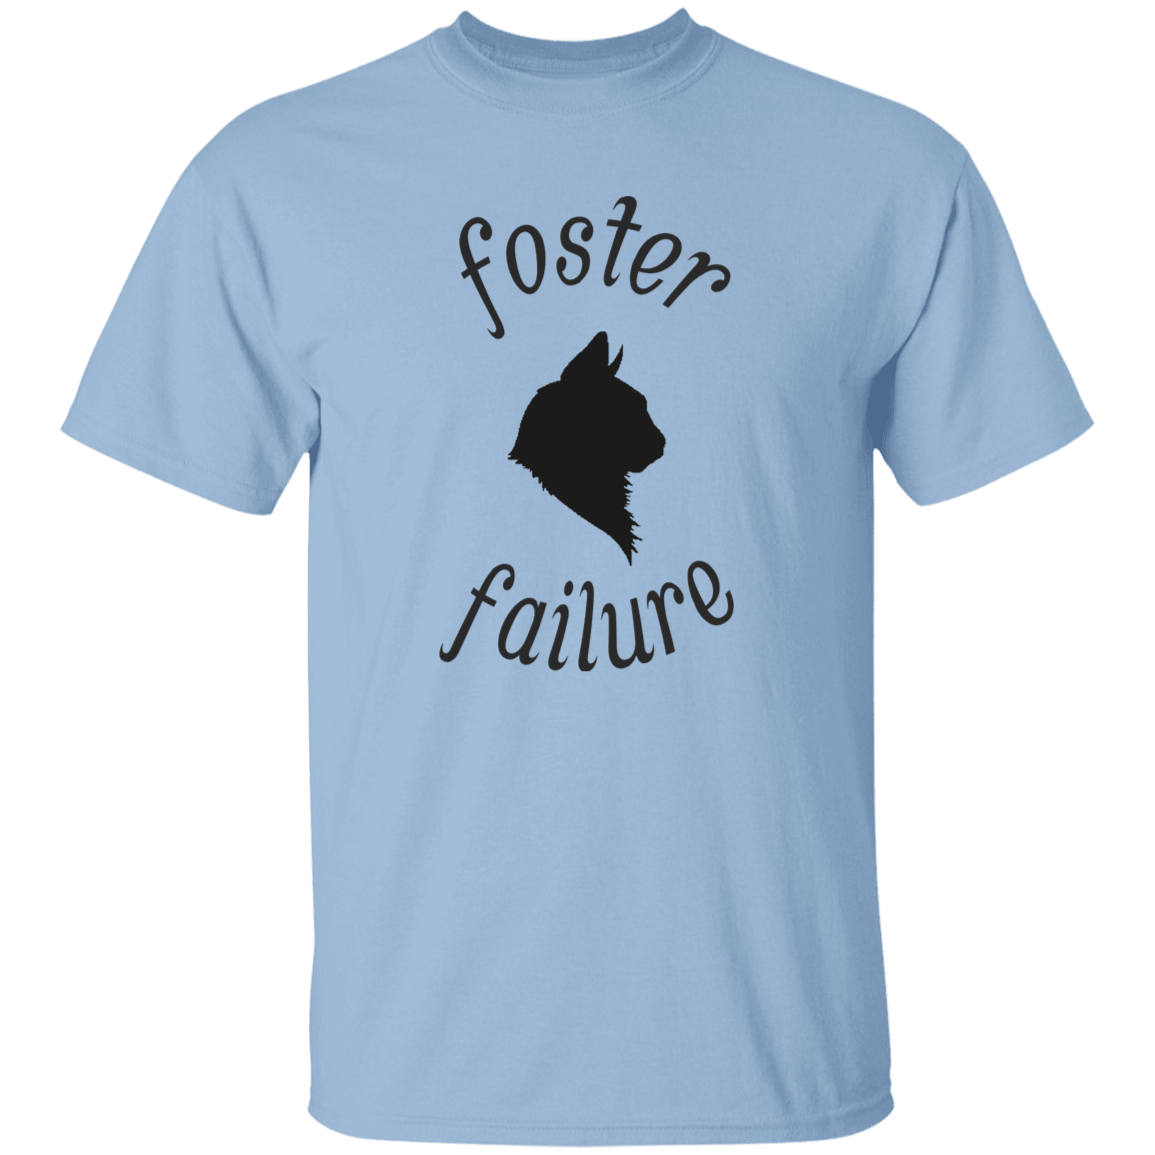 Foster Failure Cat - Youth T-Shirt.